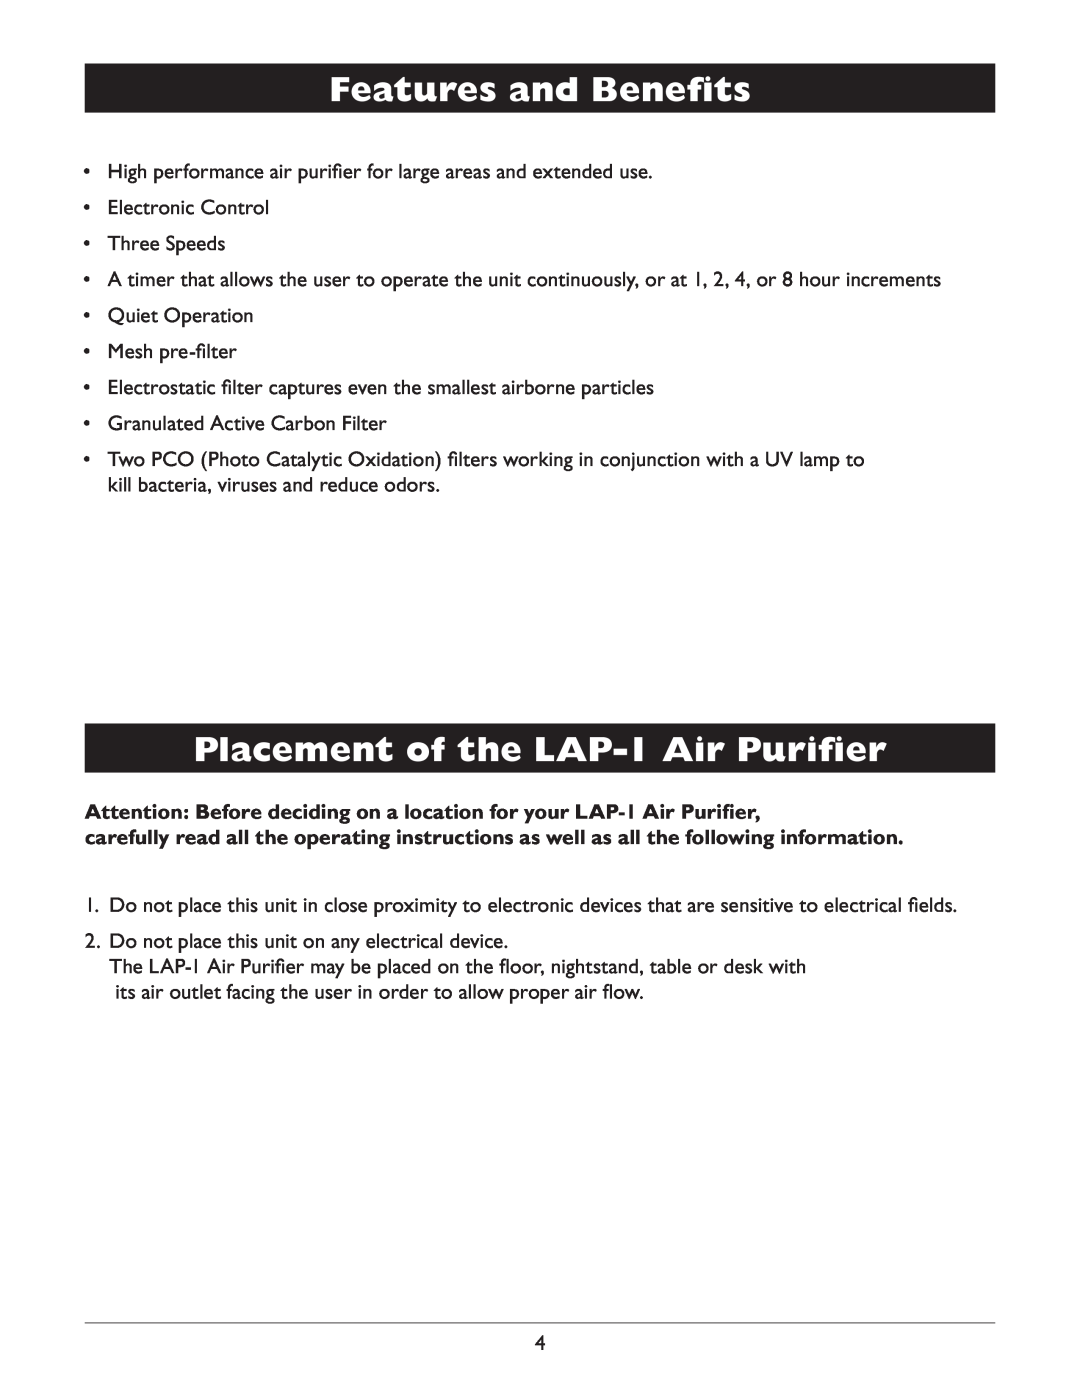 Amcor owner manual Features and Benefits, Placement of the LAP-1Air Purifier 